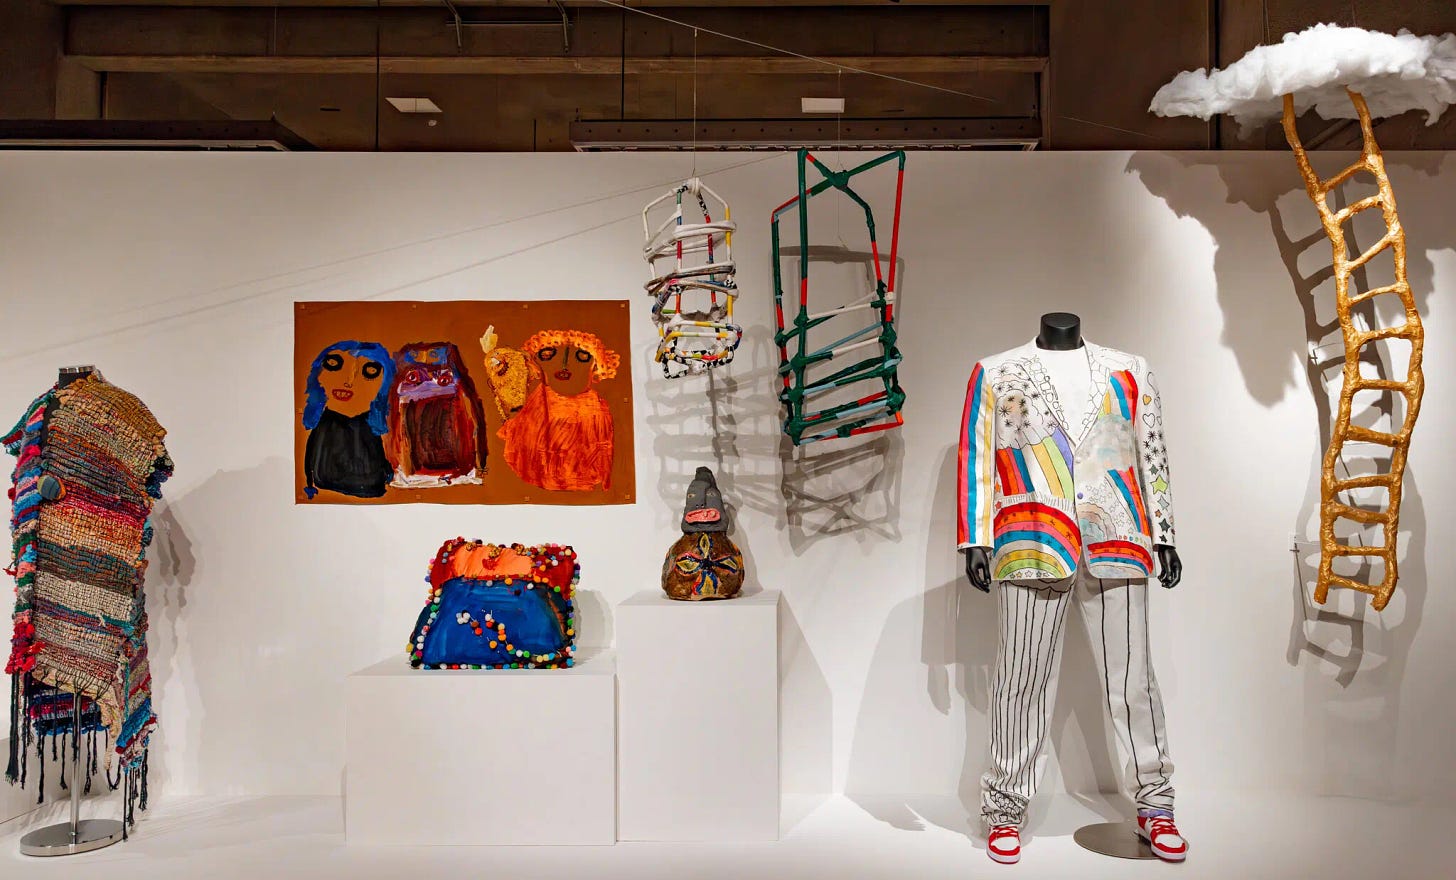 An eclectic mix of objects are being shown in the “Into the Brightness” exhibition at the Oakland Museum of California, which features pieces by nearly 300 artists from Creative Growth and its two Bay Area sister organizations.